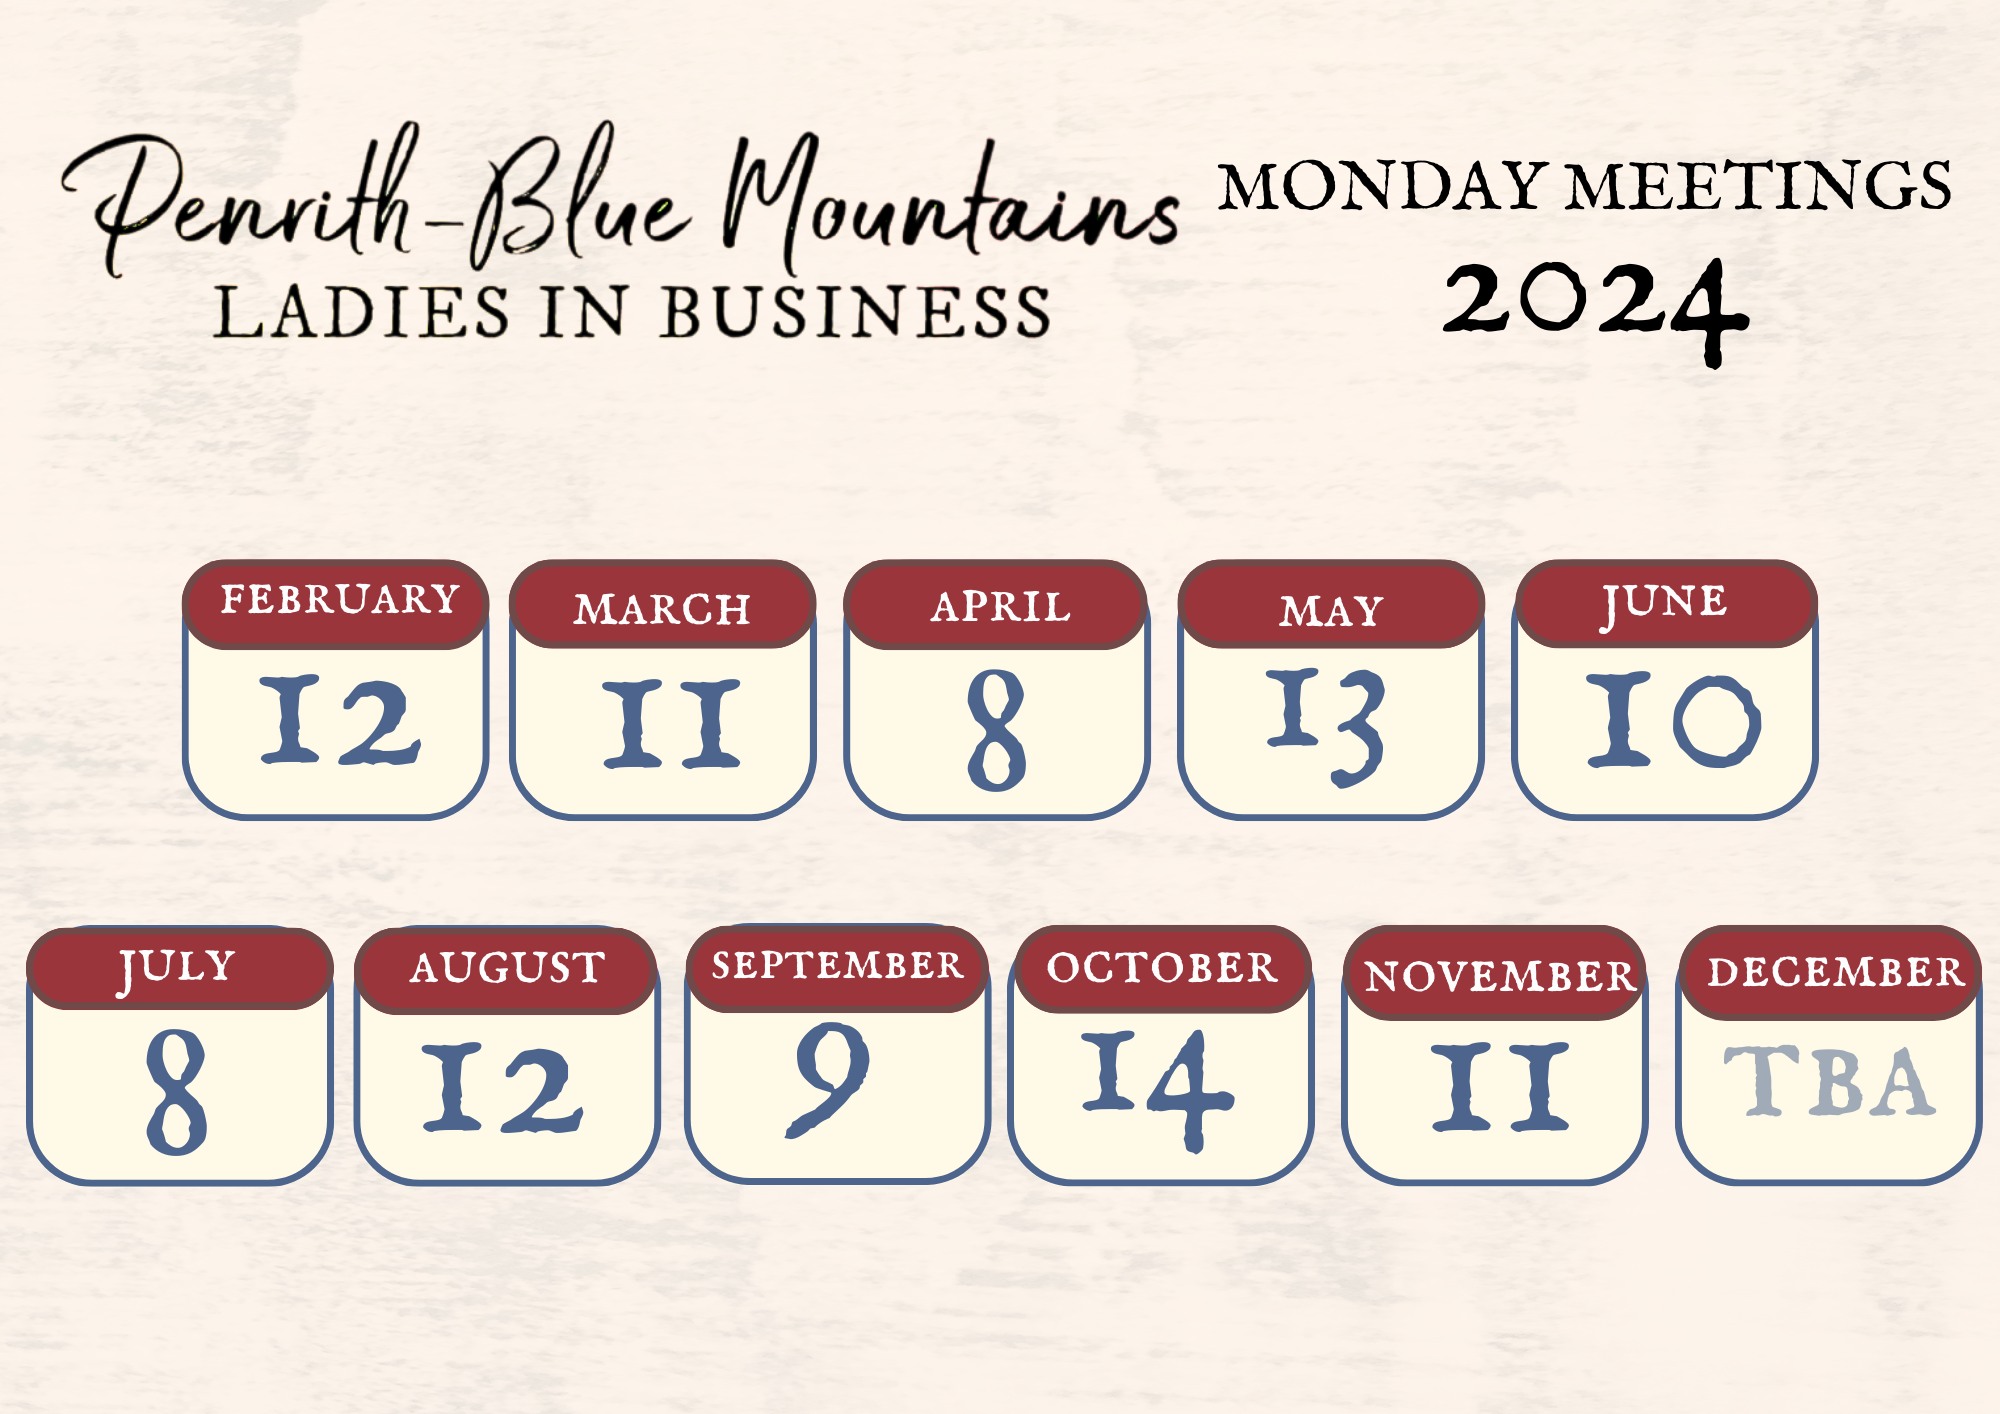 Penrith Blue Mountains Networking Meetings 2024